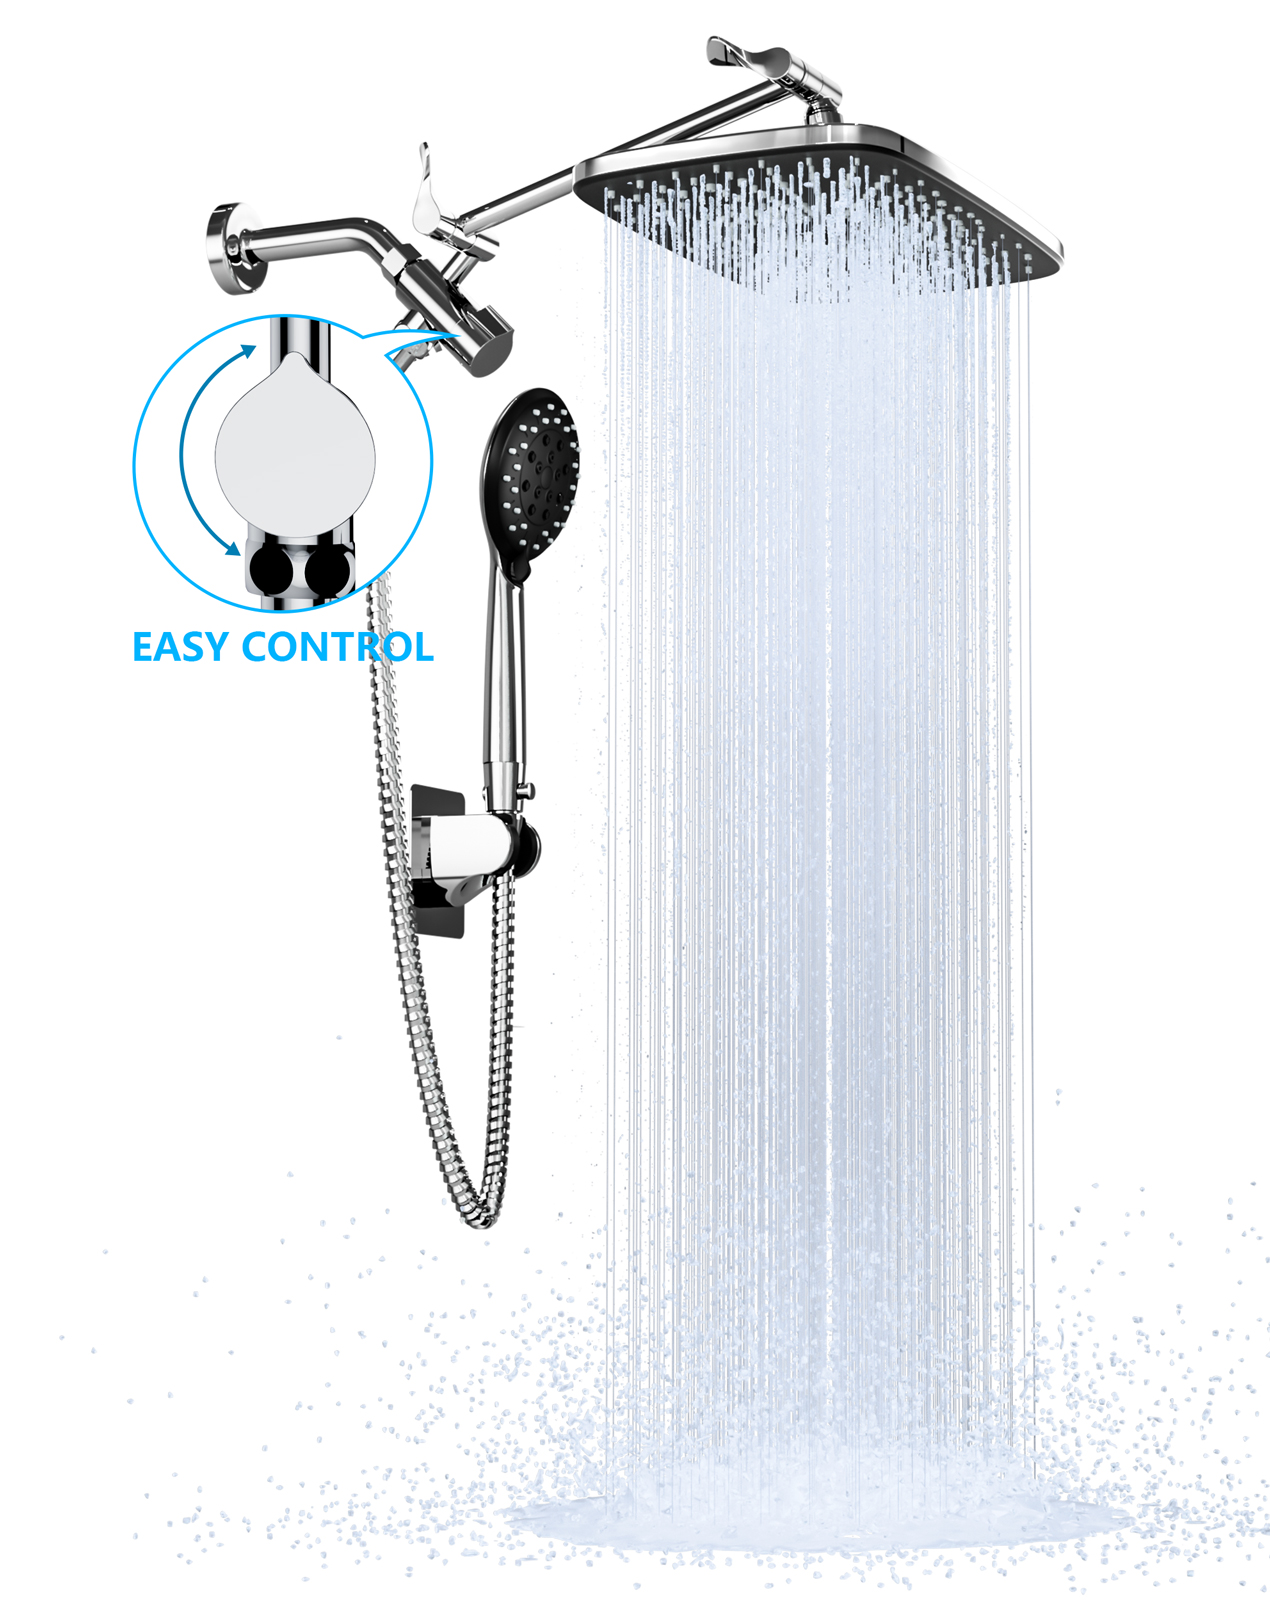 Ophanie 5-Setting High Pressure Shower Head, 12 inch Rain Shower Head with Handheld and Hose, Chrome - image 1 of 10